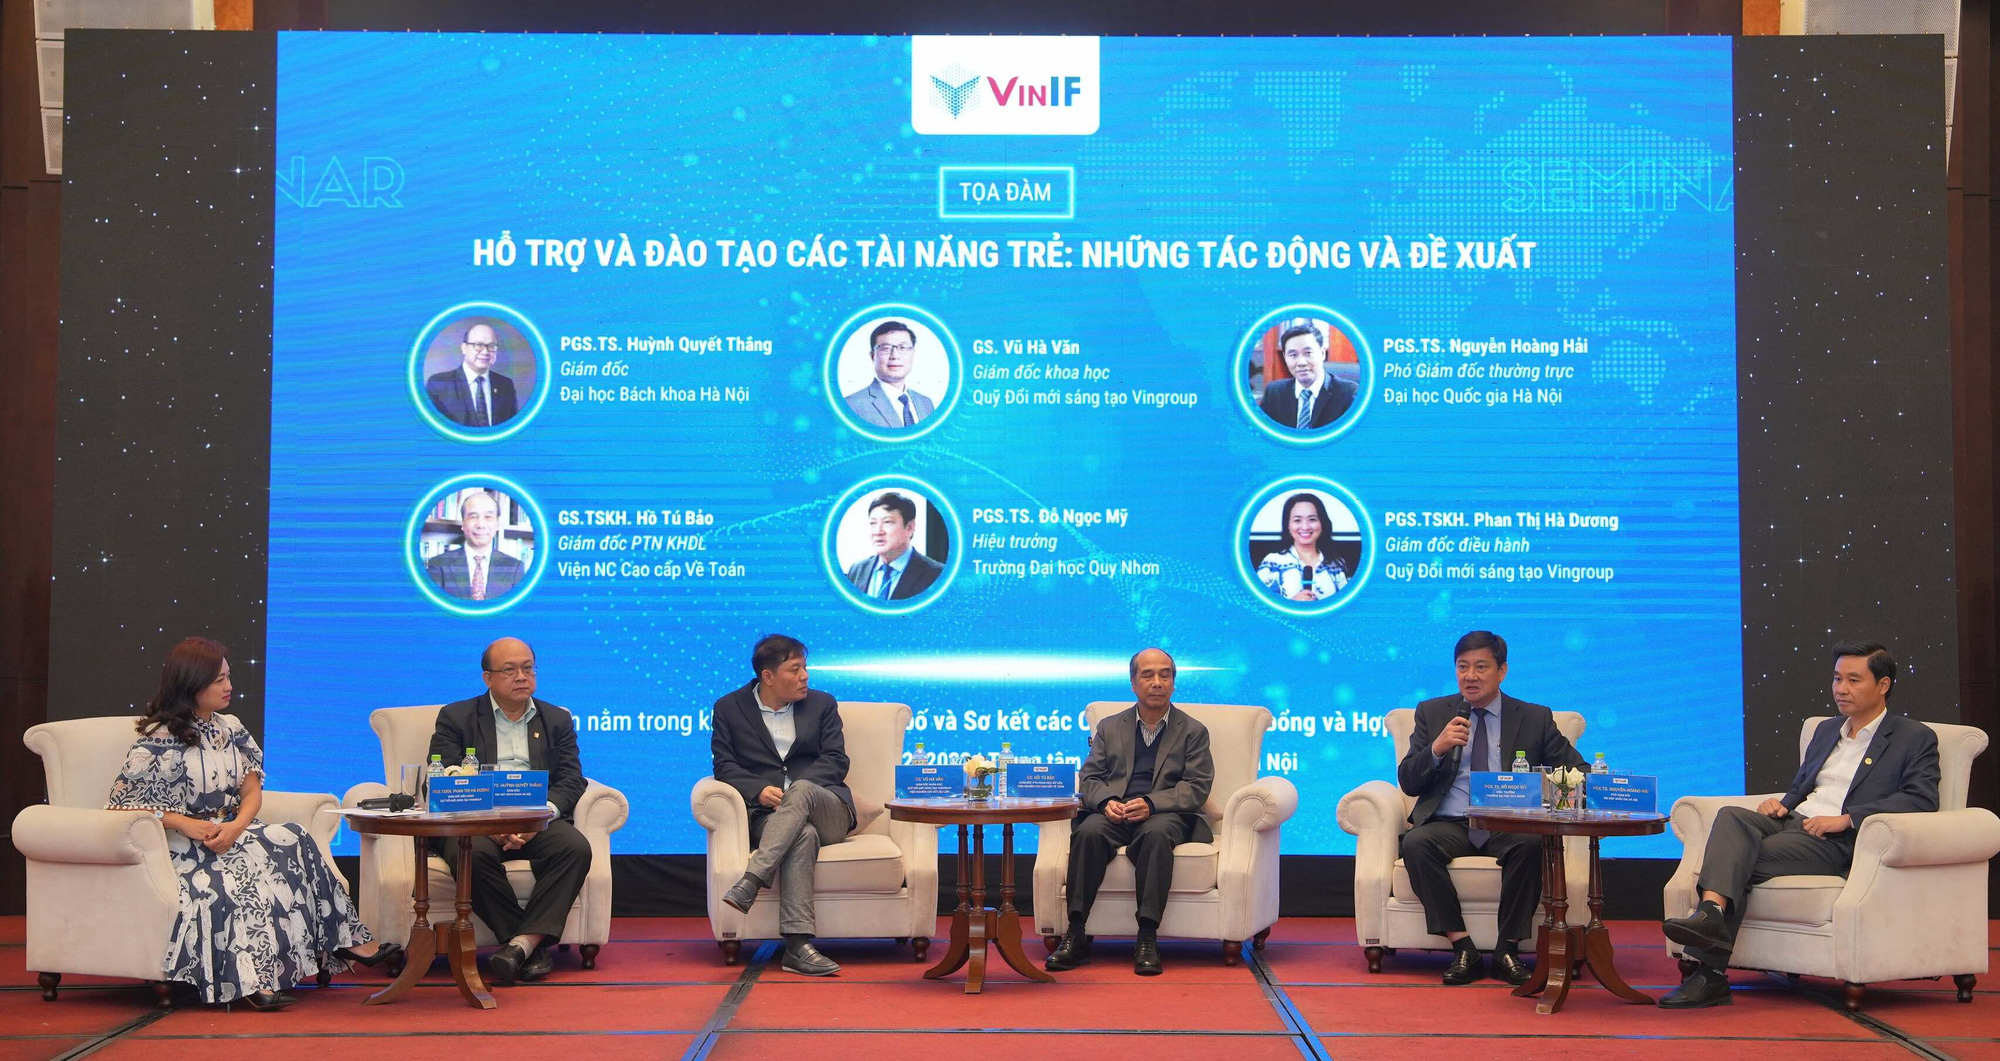 VINIF empowers young Vietnamese scientists - Photo 1.